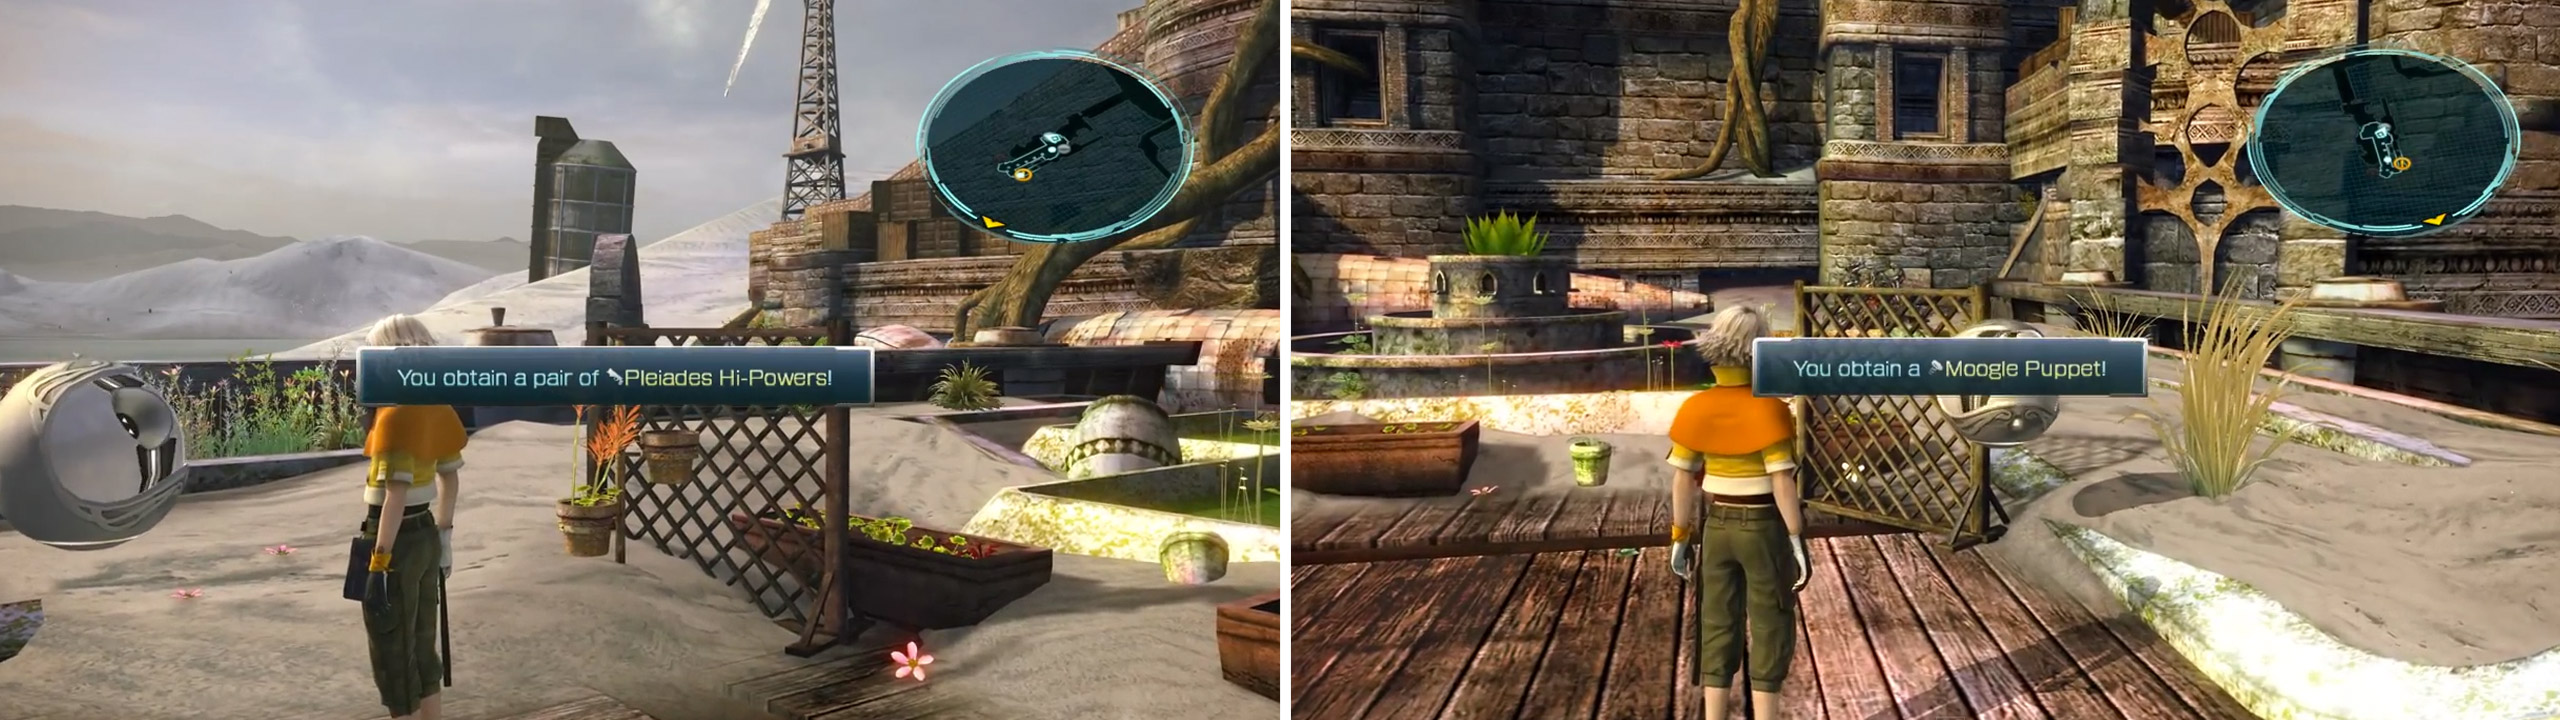 Hi-Powers location (left) and Moogle Puppet location (right).